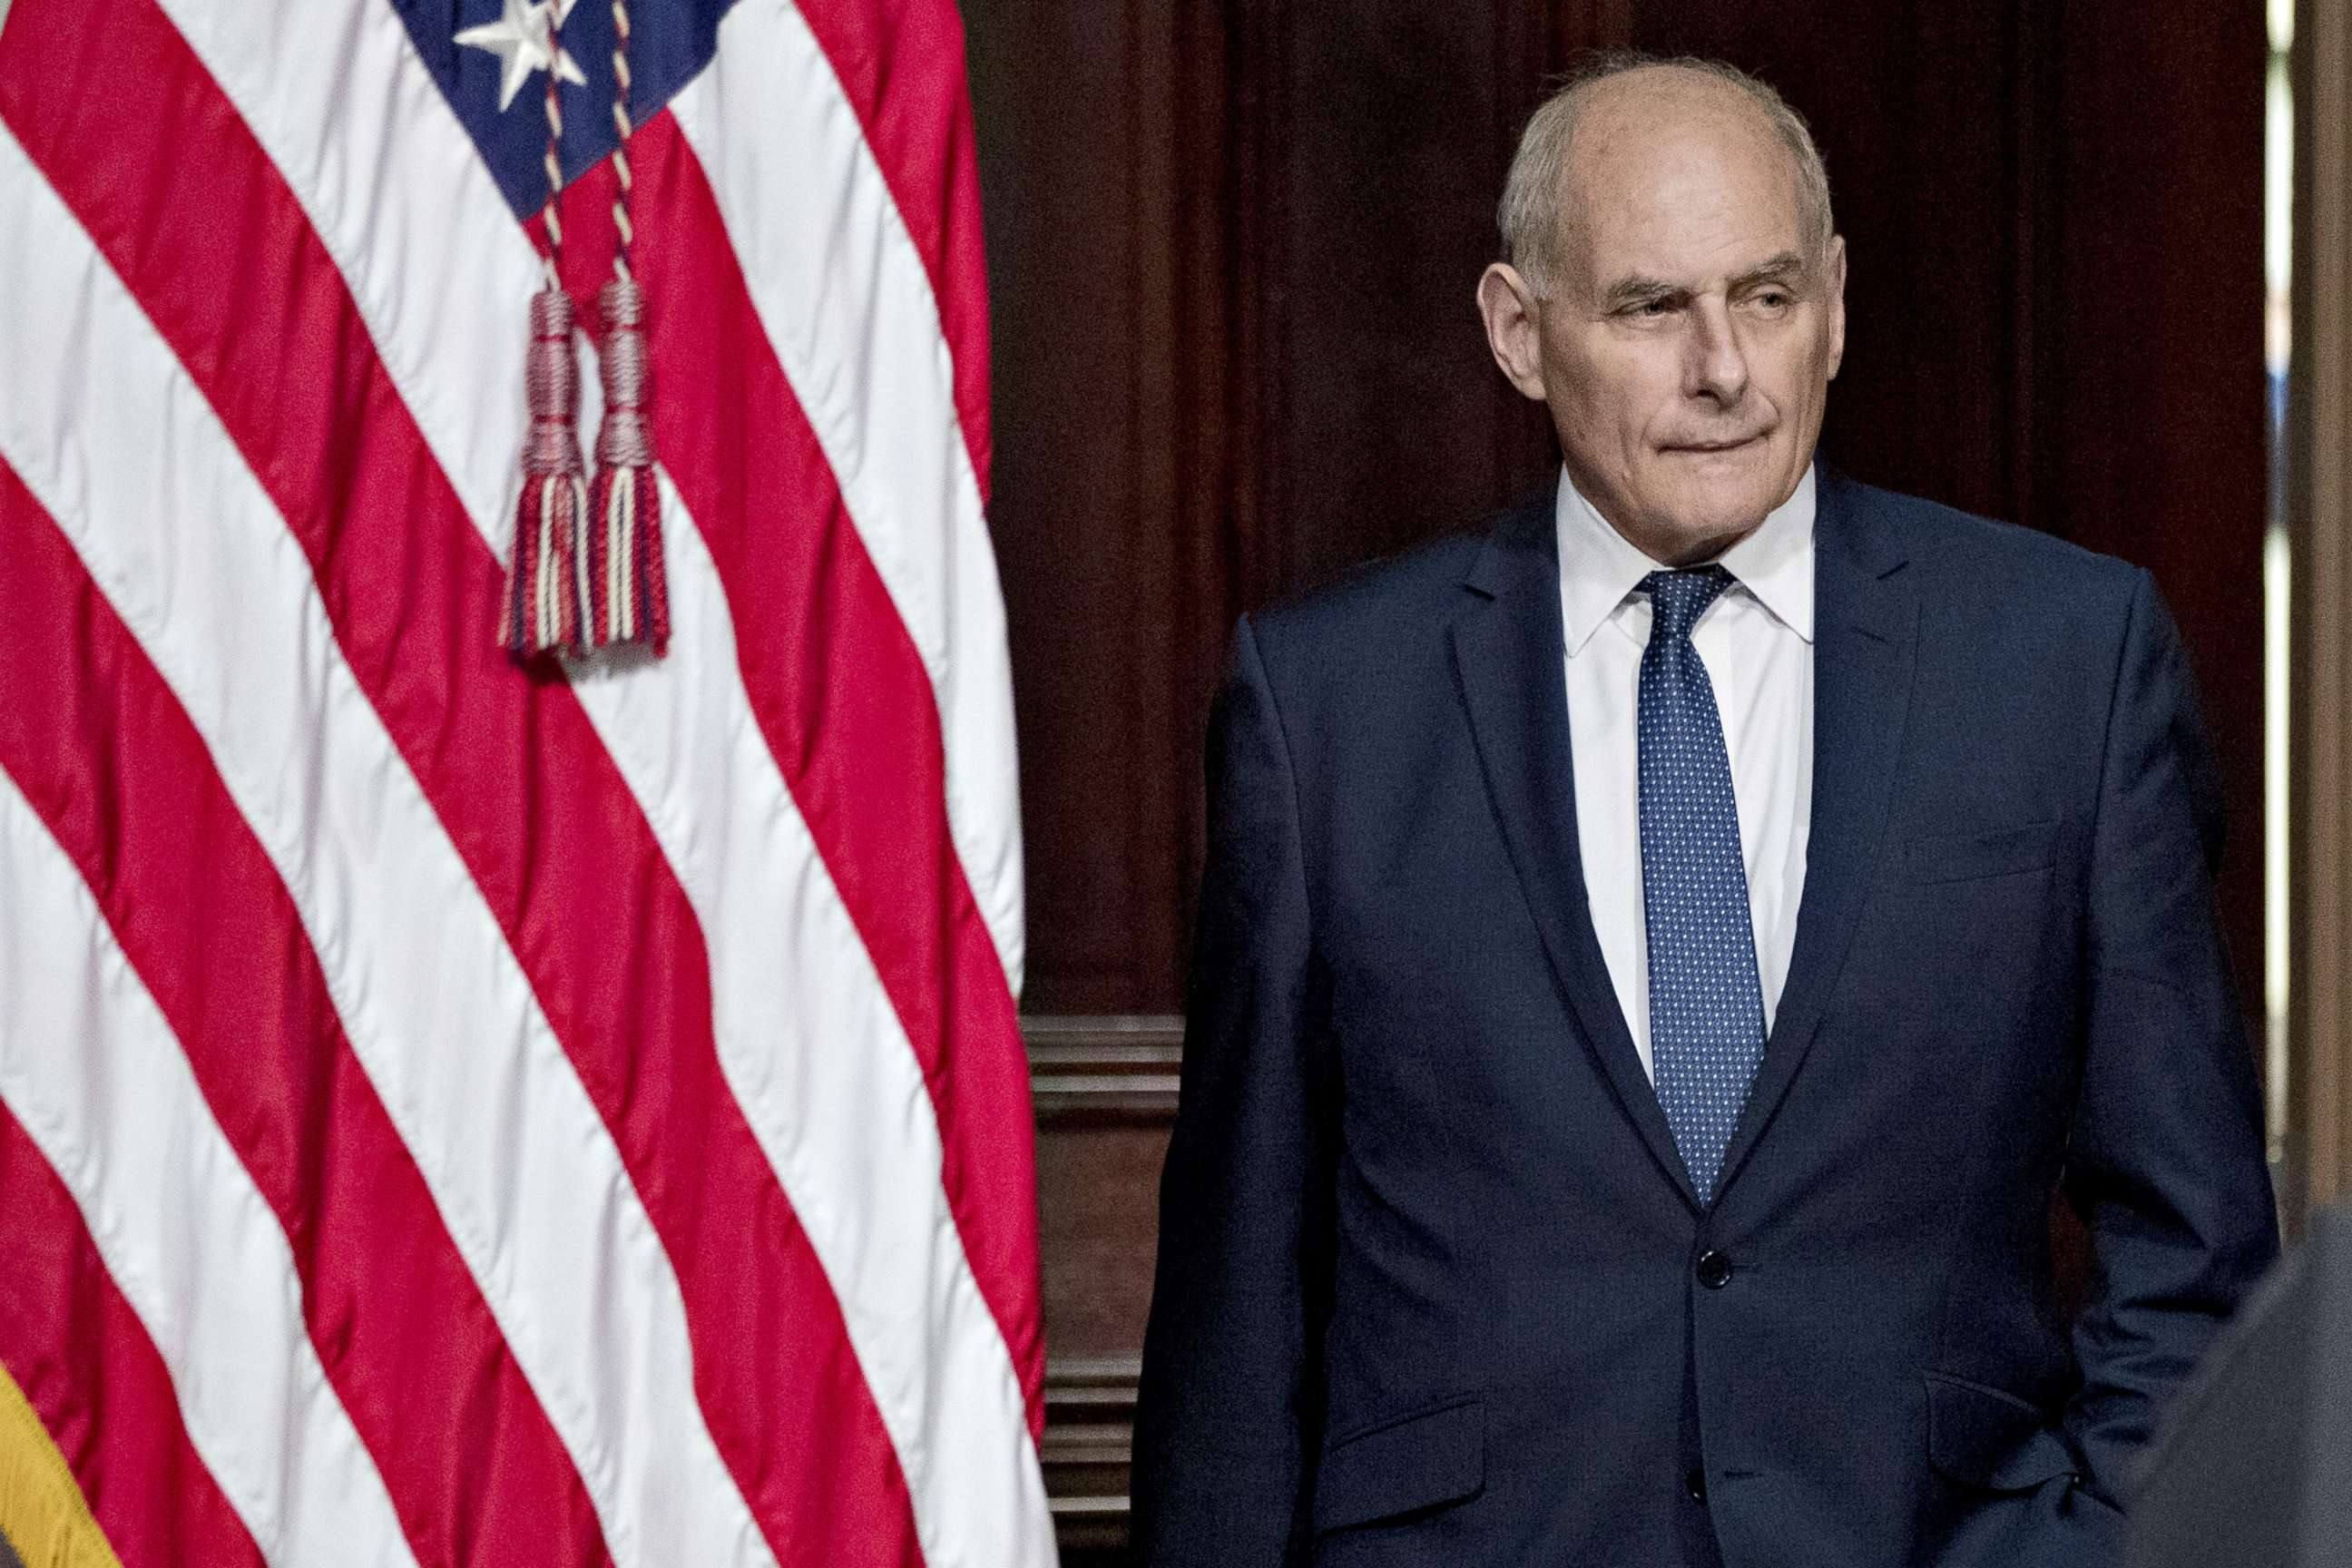 PHOTO: John Kelly, White House chief of staff, attends an Interagency Task Force to Monitor and Combat Trafficking in Persons annual meeting in Washington, D.C. in this Oct. 11, 2018 file photo.